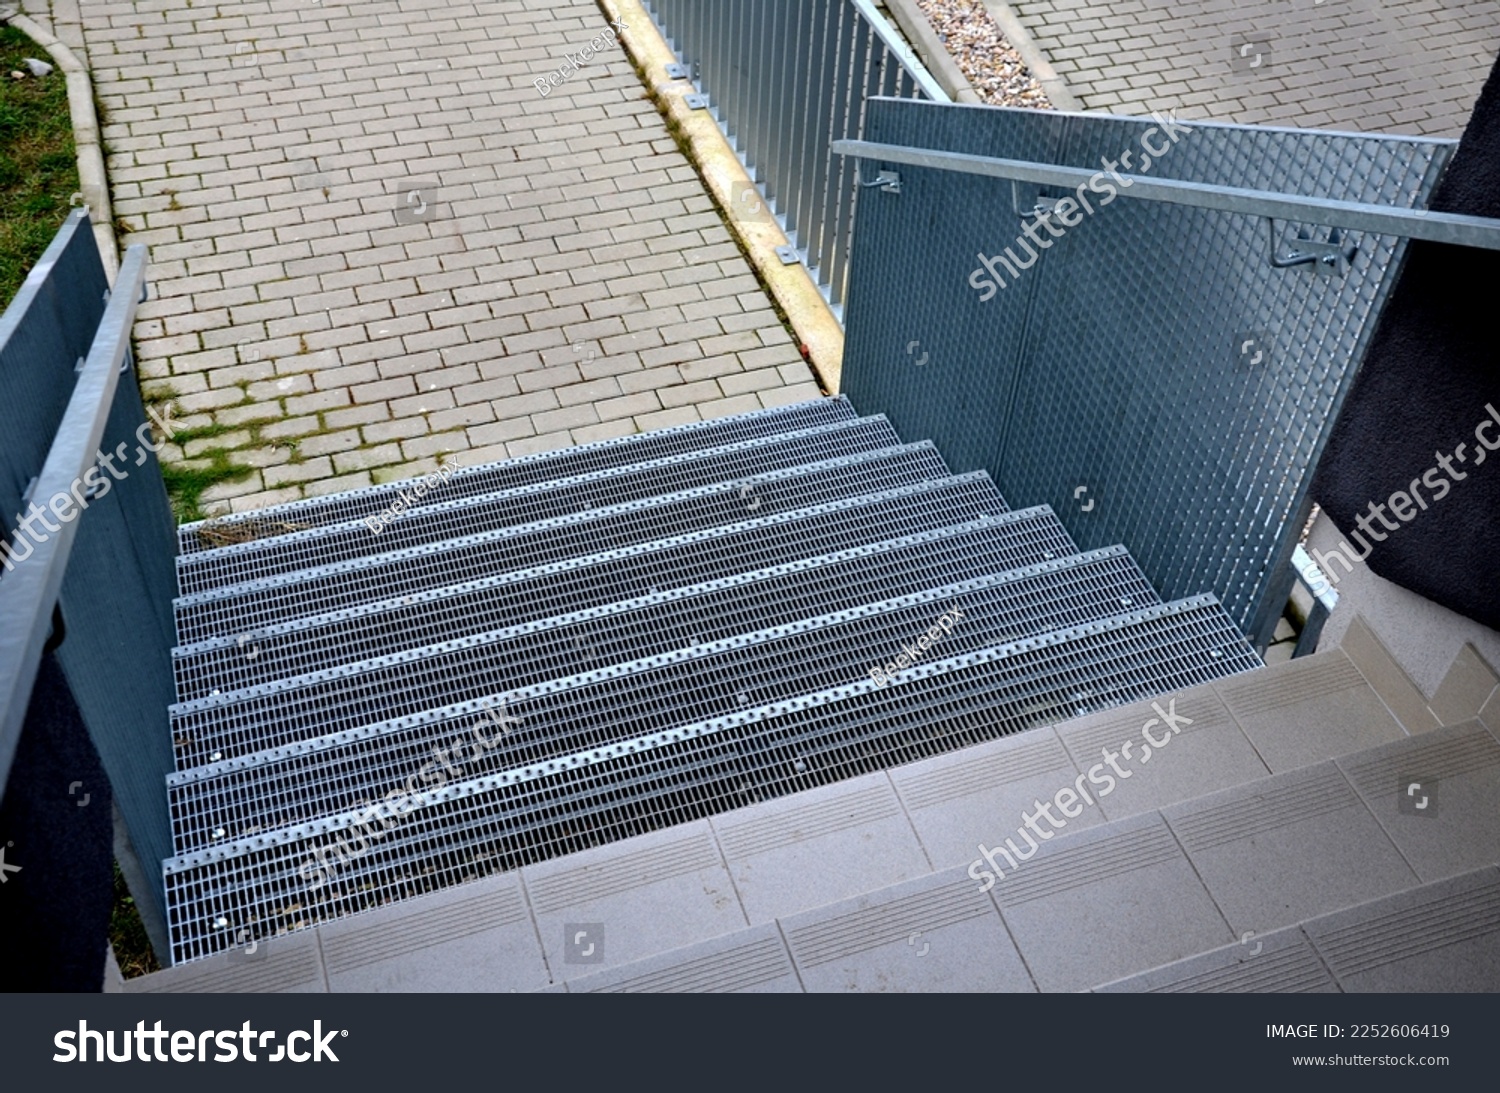 Stairs to a residential building made of stainless steel grid. galvanized stair grating made of expanded metal. lawn concrete sidewalk.  #2252606419